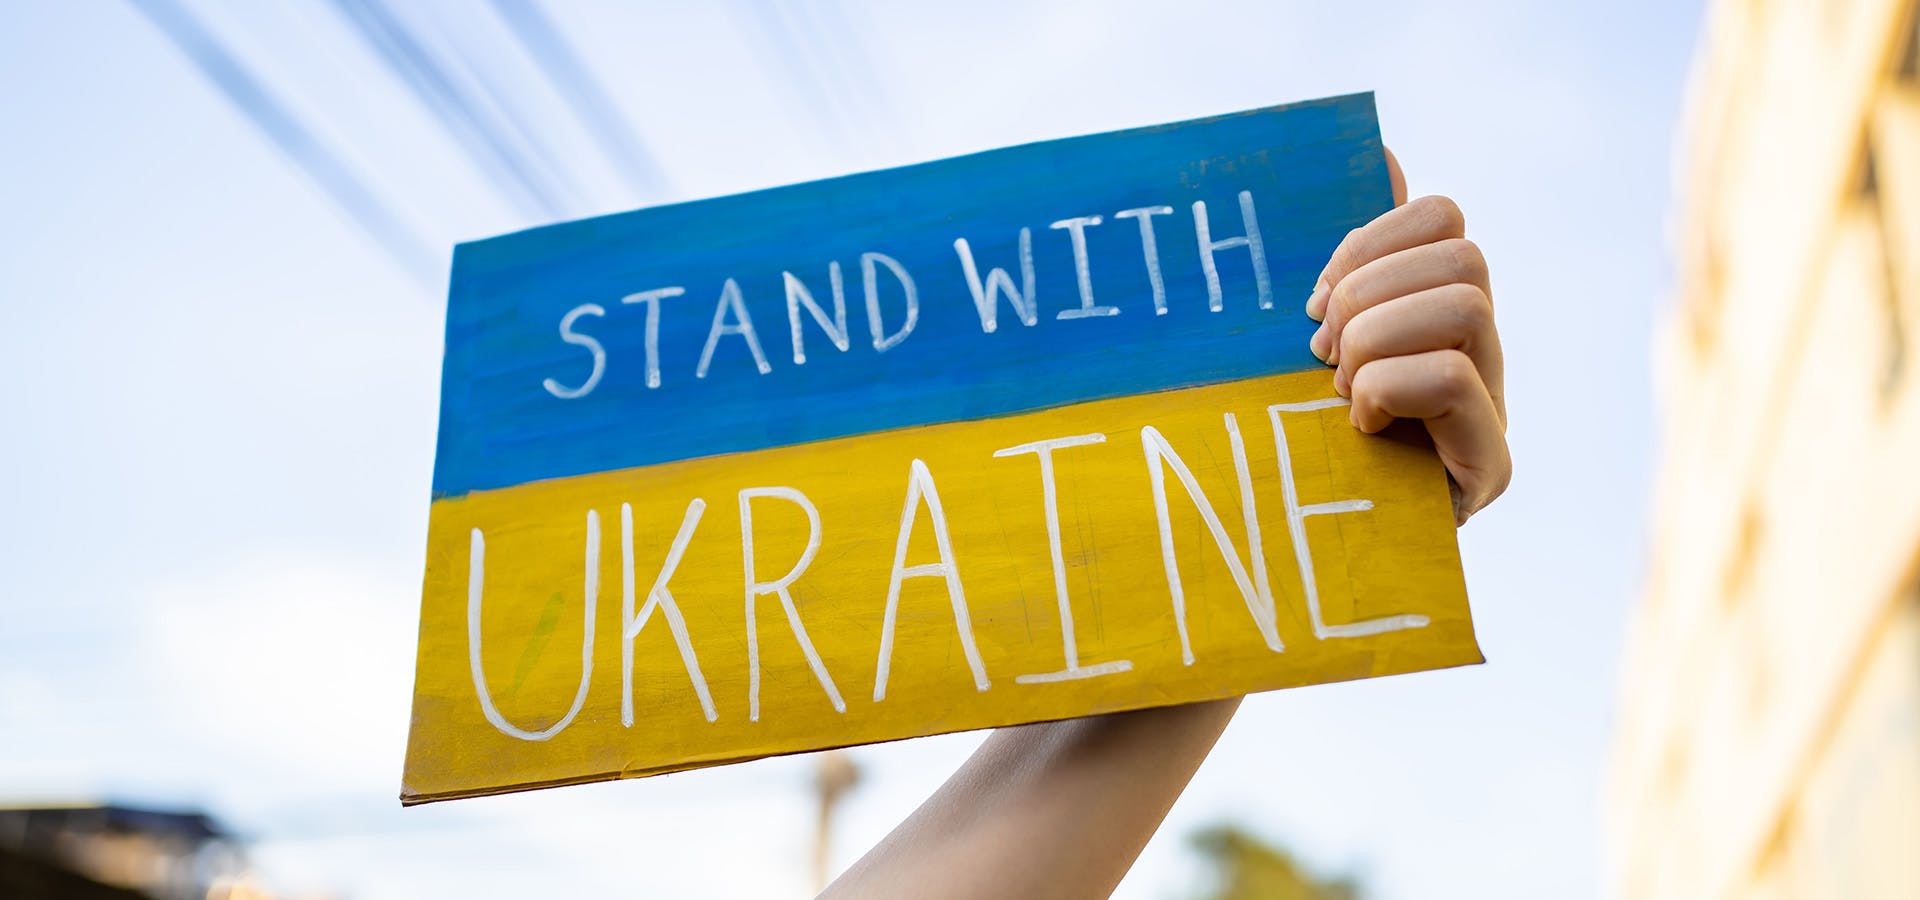 Coverr stands with Ukraine